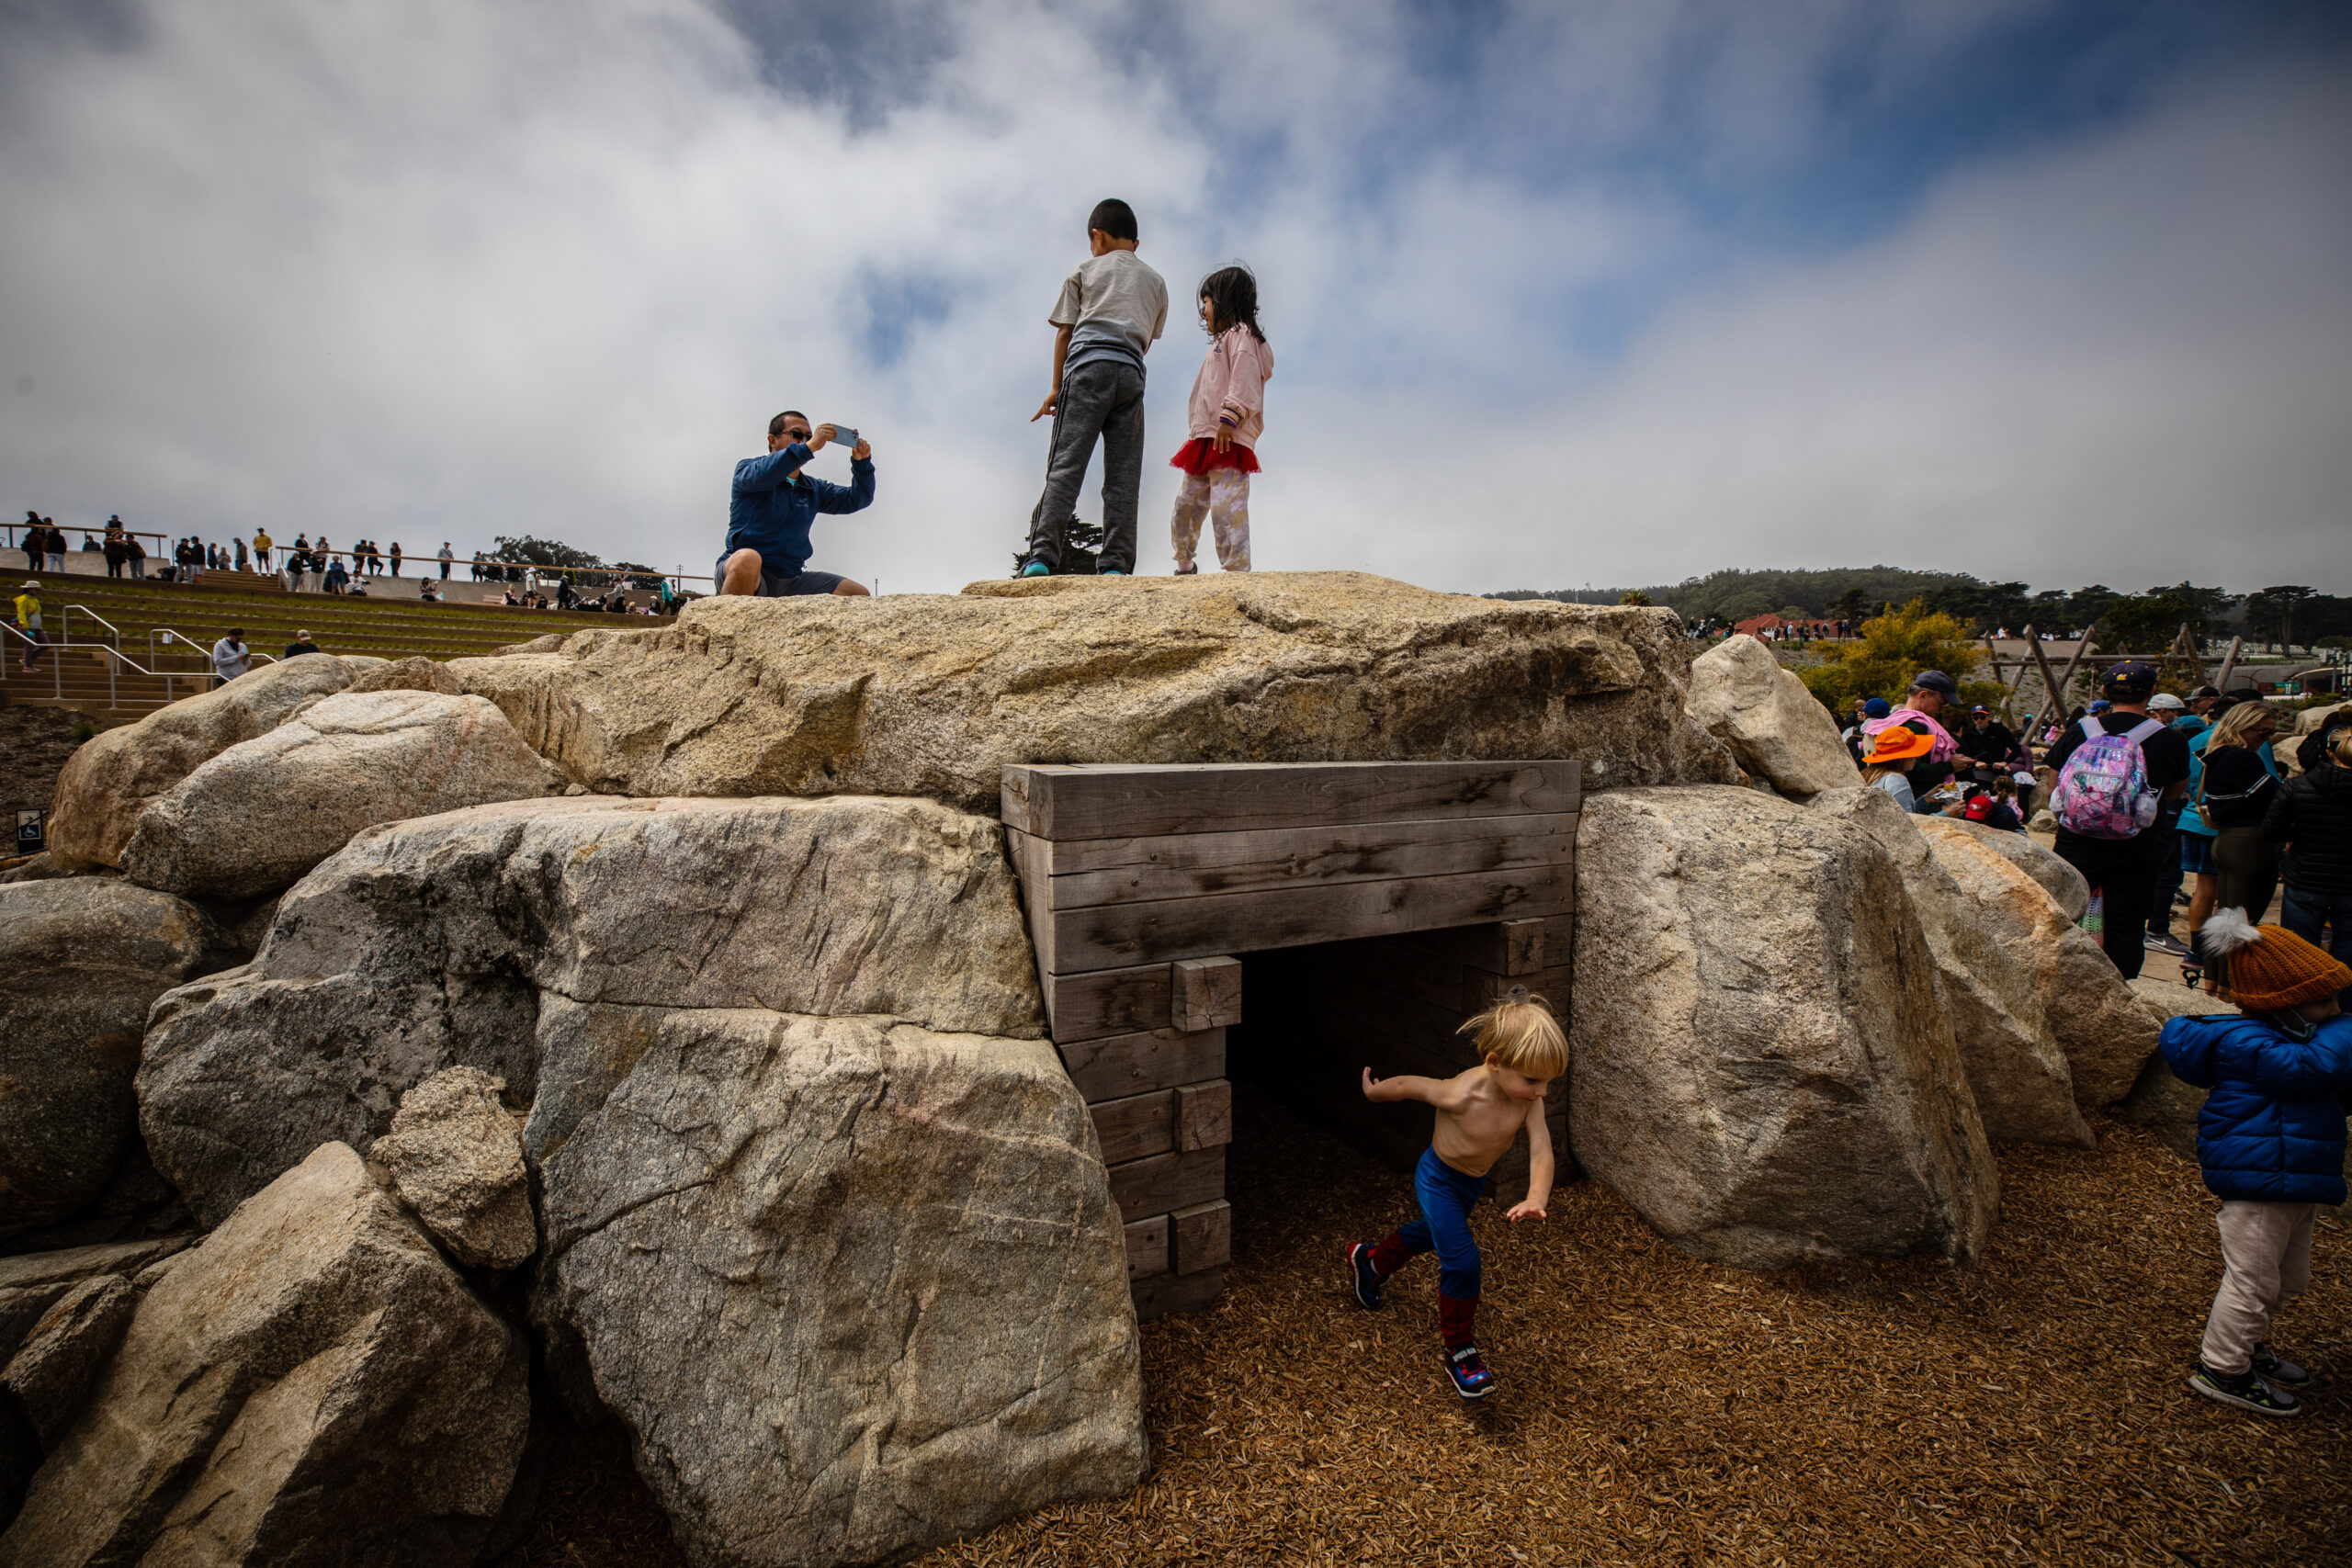 Kids playing in a rock structure.